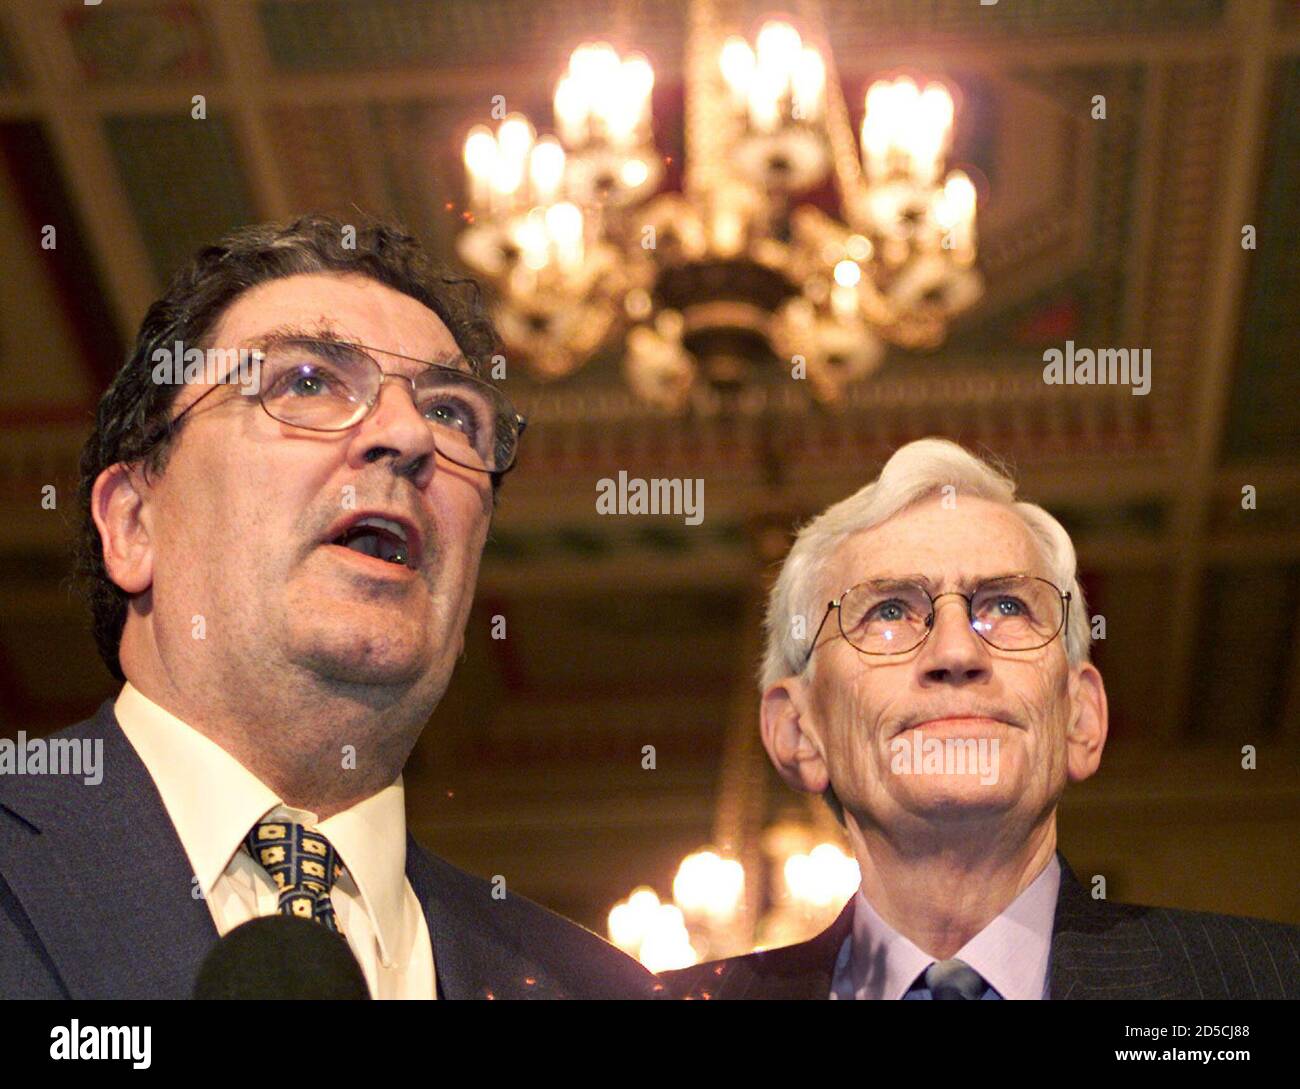 SDLP leader John Hume (L) and Deputy First Minister Seamus Mallon address the Media at Stormont, November 29. Protestant and Roman Catholic parties nominated ministers to a coalition government of pro-Irish Republicans and pro-British Unionists which will become fully operational on Thursday, when London will hand over power.  FP/AA Stock Photo